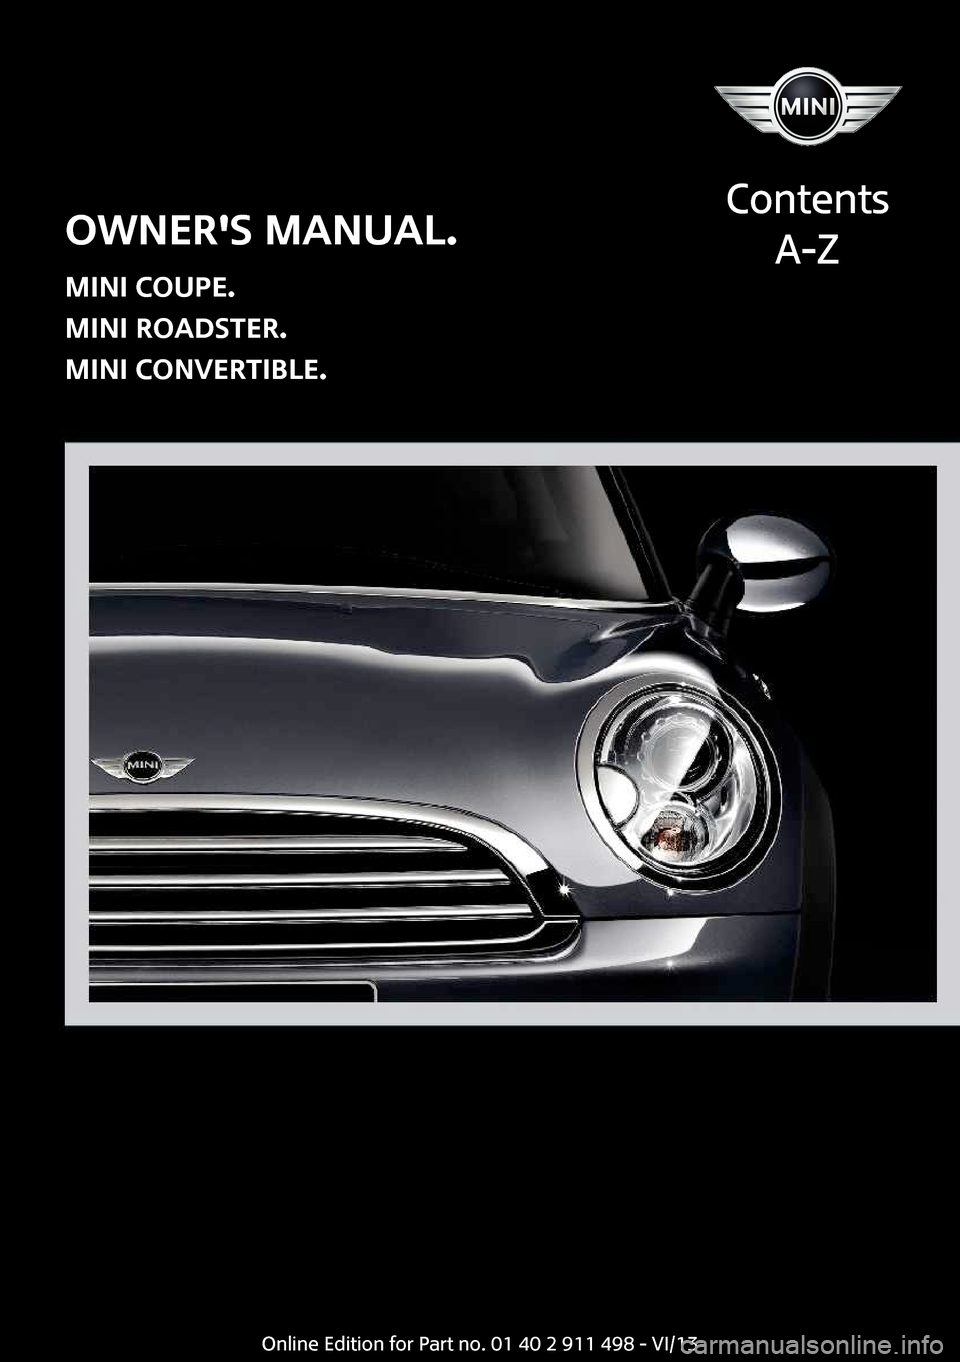 MINI Roadster 2014  Owners Manual (Mini Connected) Owners Manual.
MINI Coupe.
MINI Roadster.
MINI Convertible.
Contents
A-ZOnline Edition for Part no. 01 40 2 911 498 - VI/13  